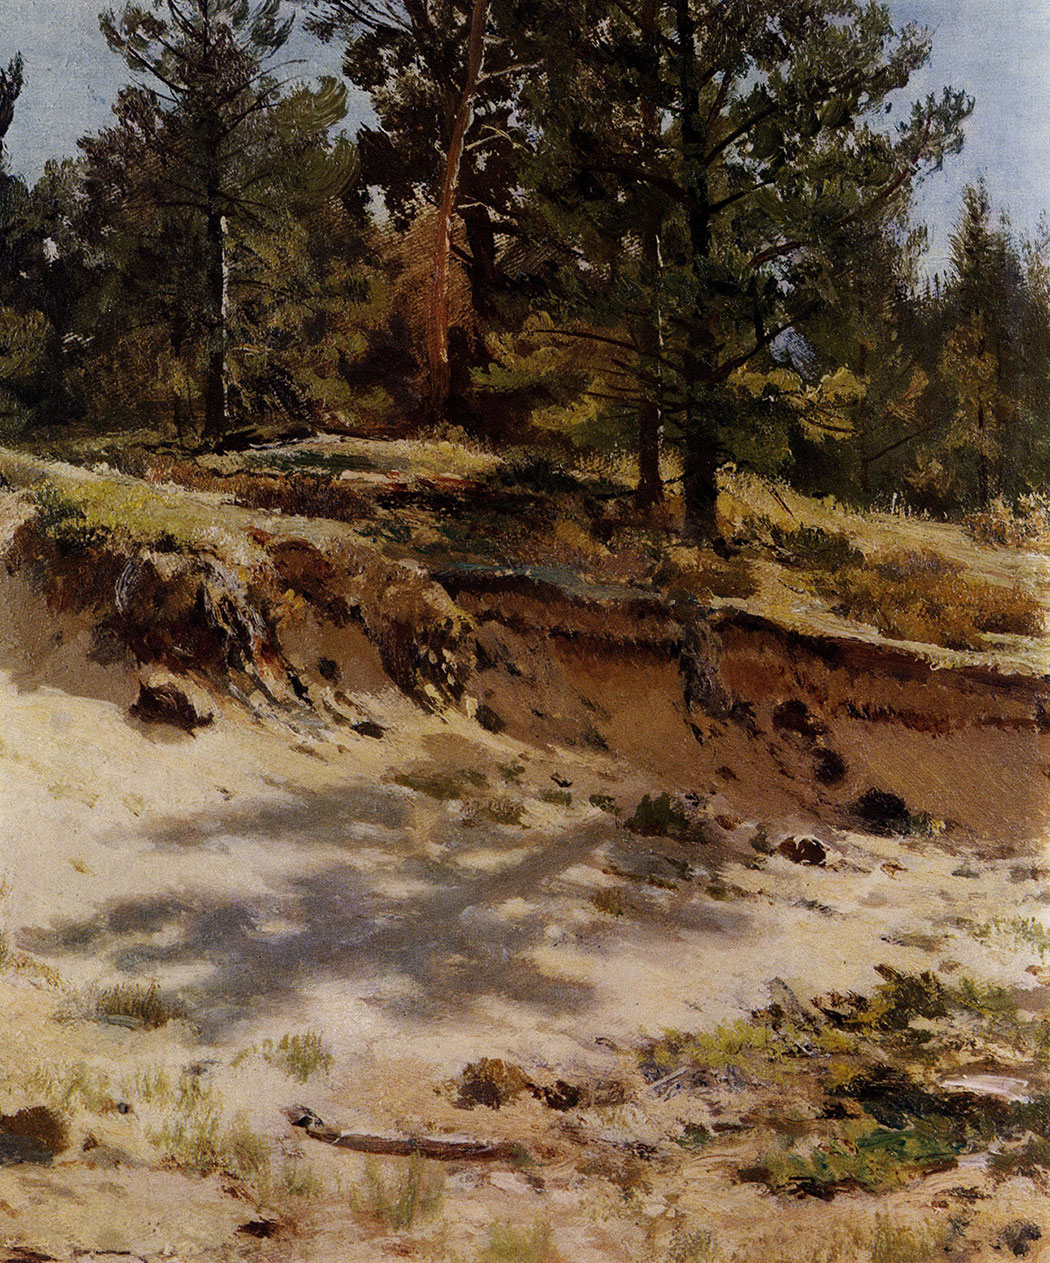 172. Young pines on a sand bluff. Meri-Hovi, Finland railway. Study. 1890. Oil on canvas. 33X59 cm. The Russian Museum, Leningrad